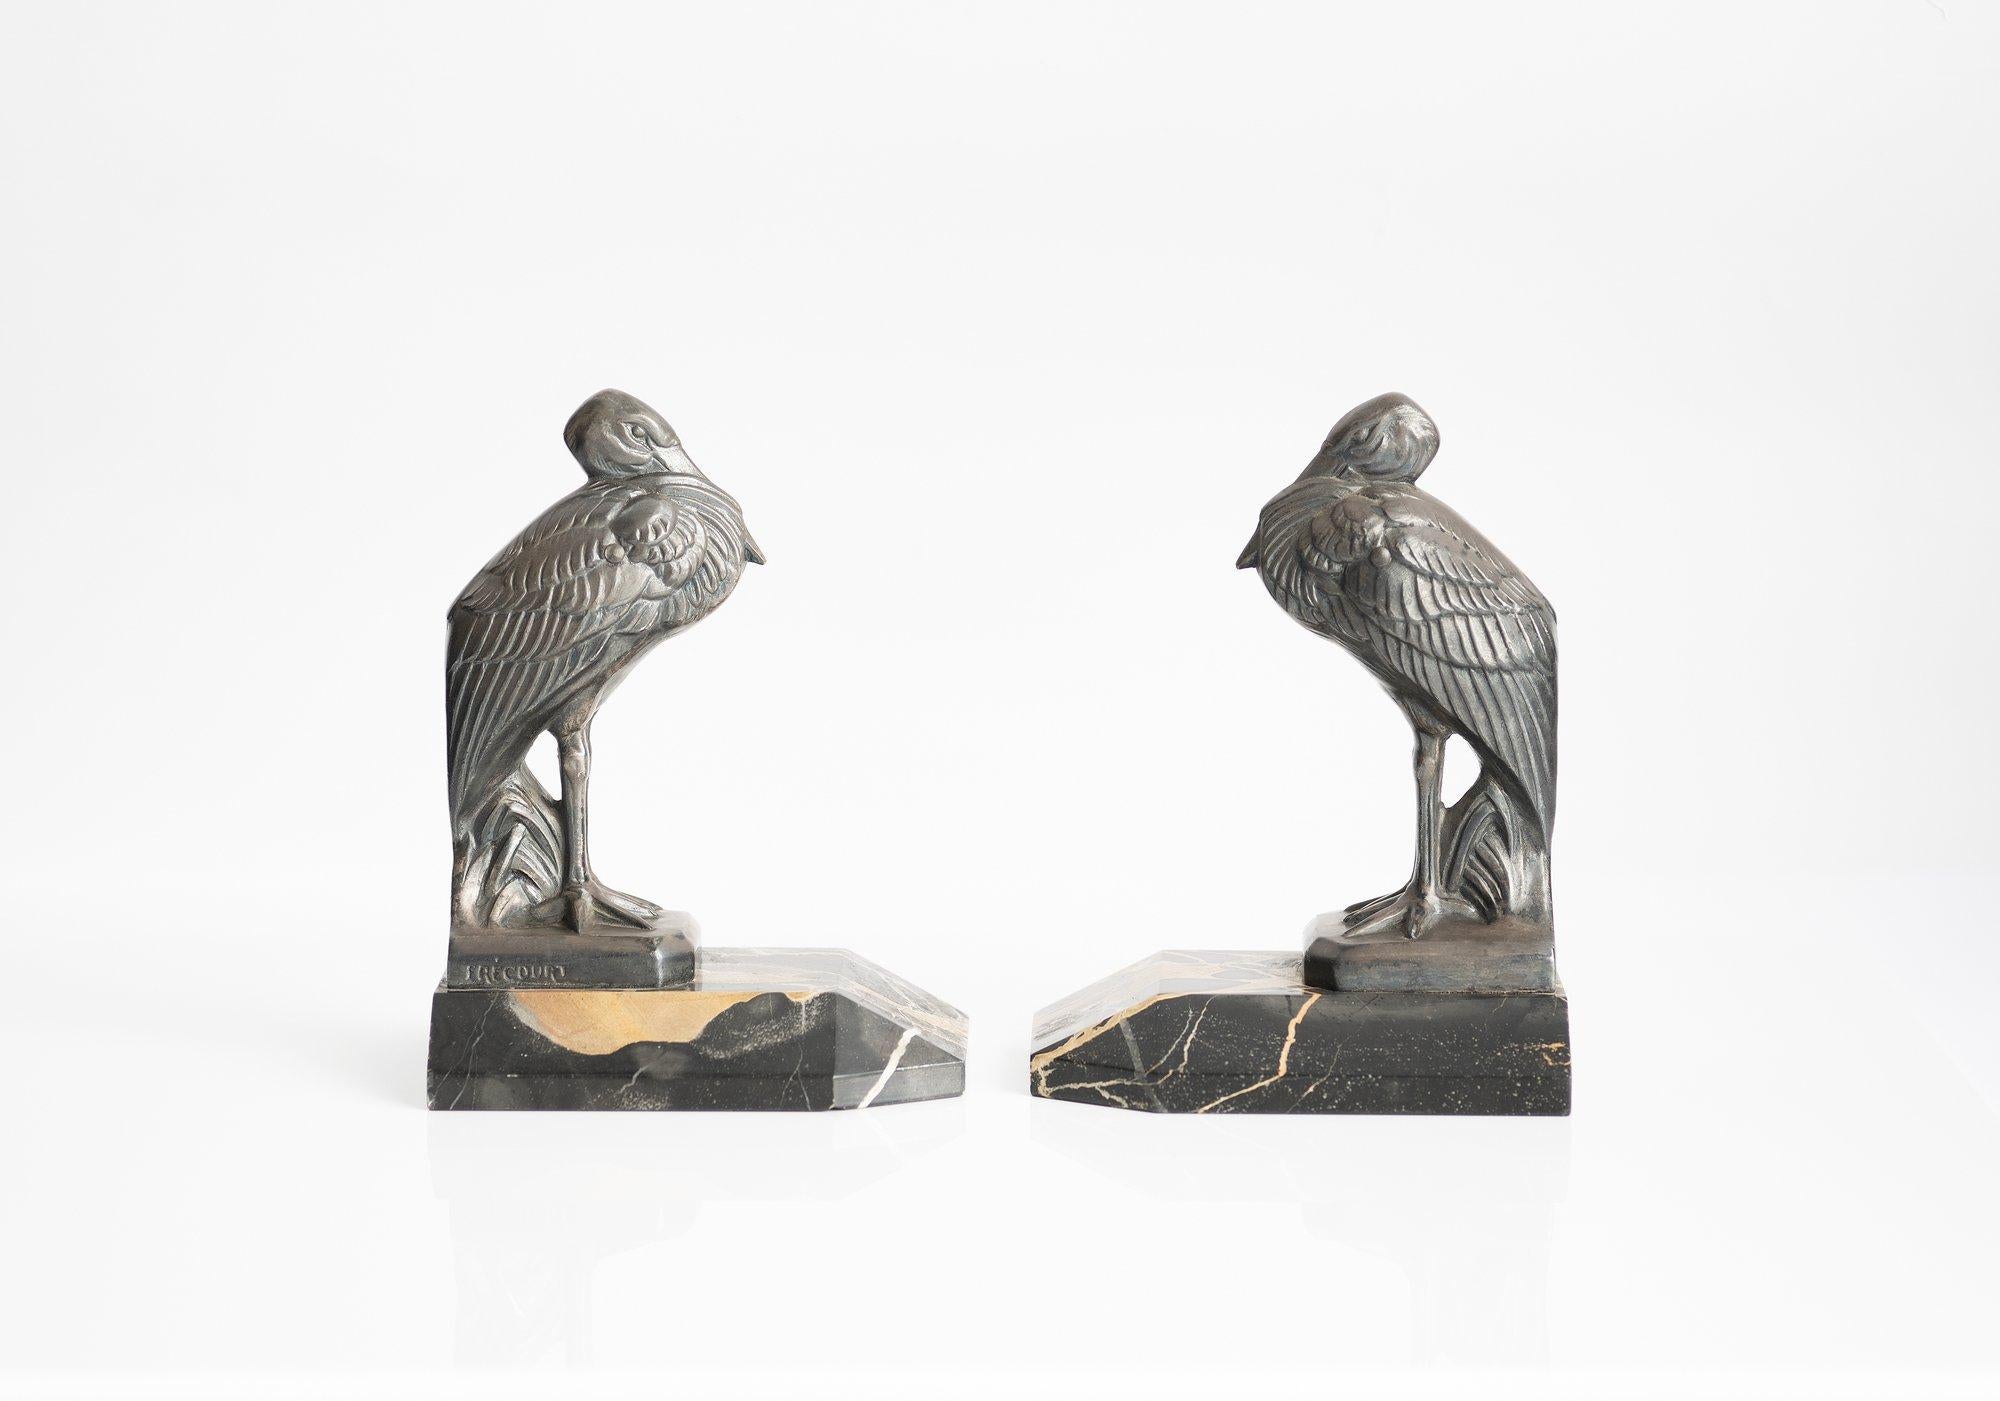 Very beautiful and rare pair of spelter bookends featuring herons made by the artist Maurice Frécourt (1890-1961). Executed in the middle of the art deco period around 1930. These two pieces are signed by the artist. The haughty bearing of these